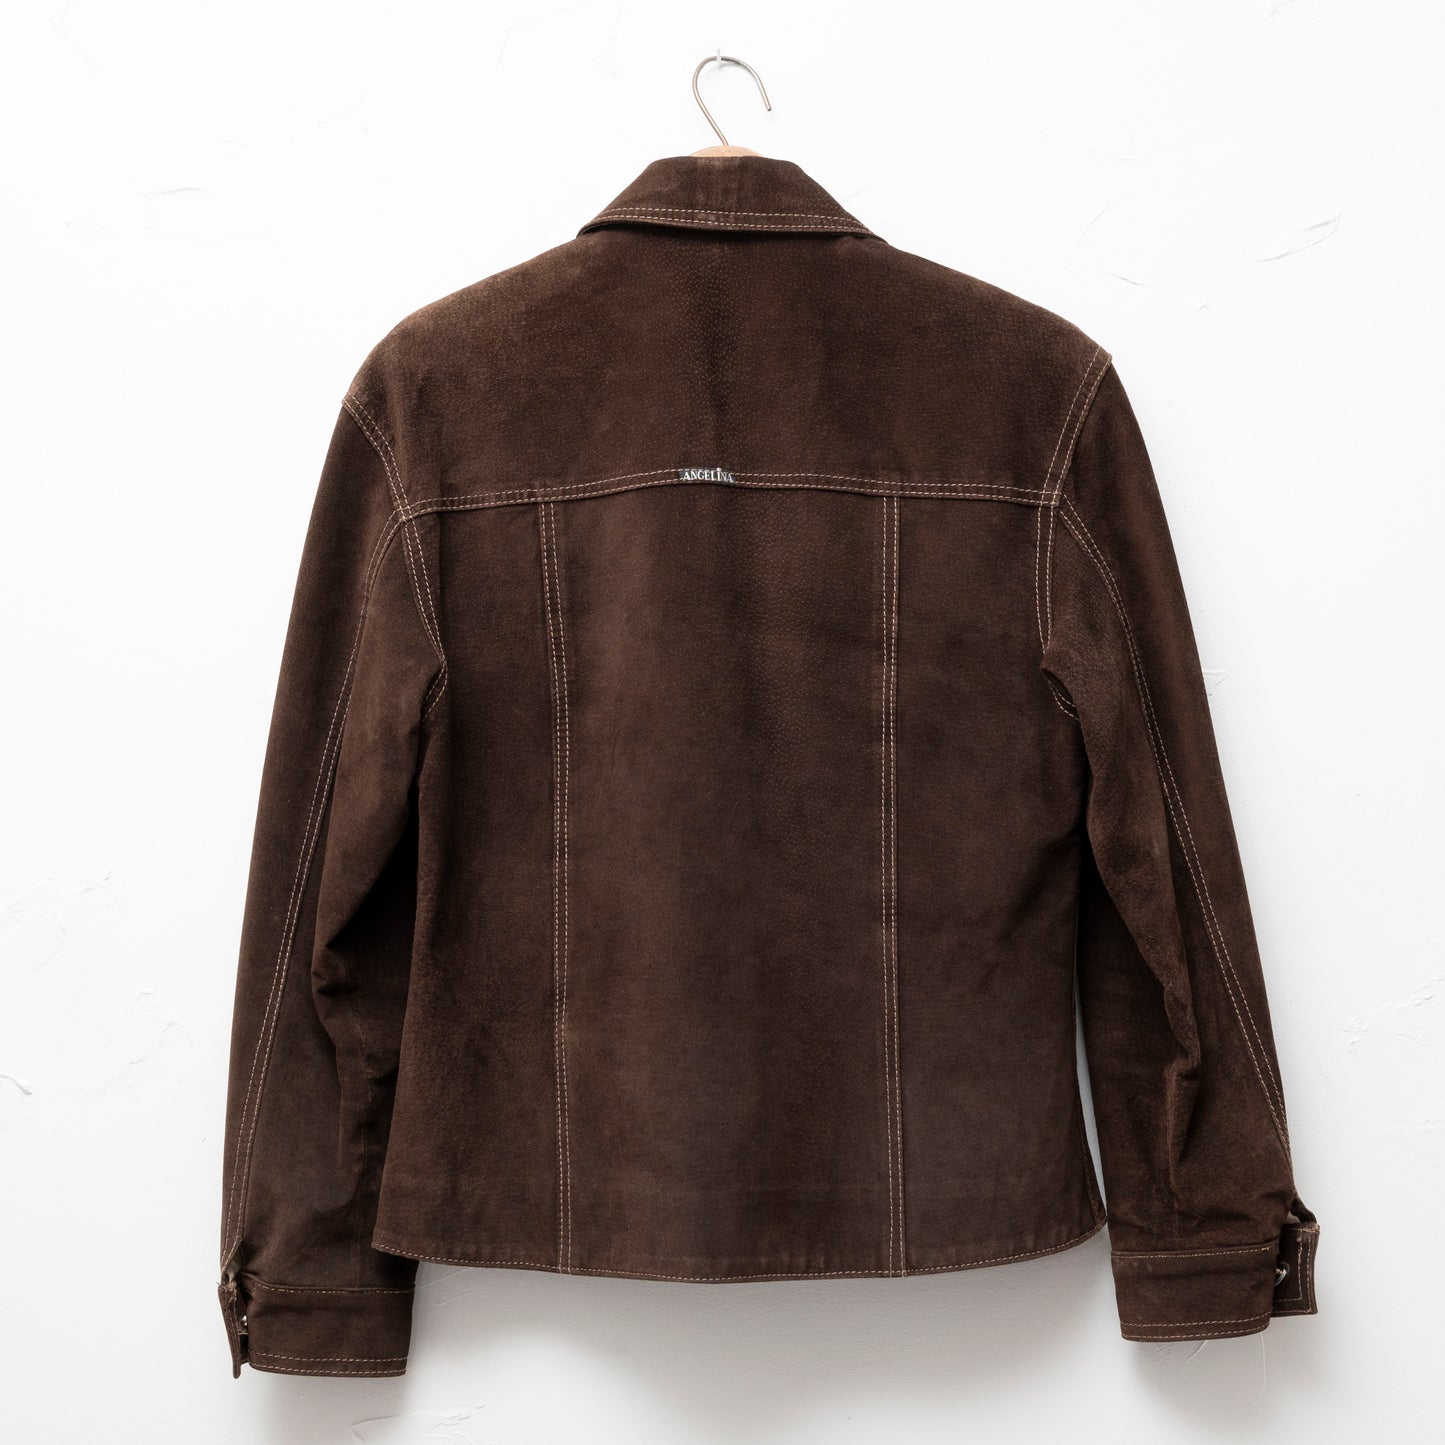 Brown suede jacket - women's small